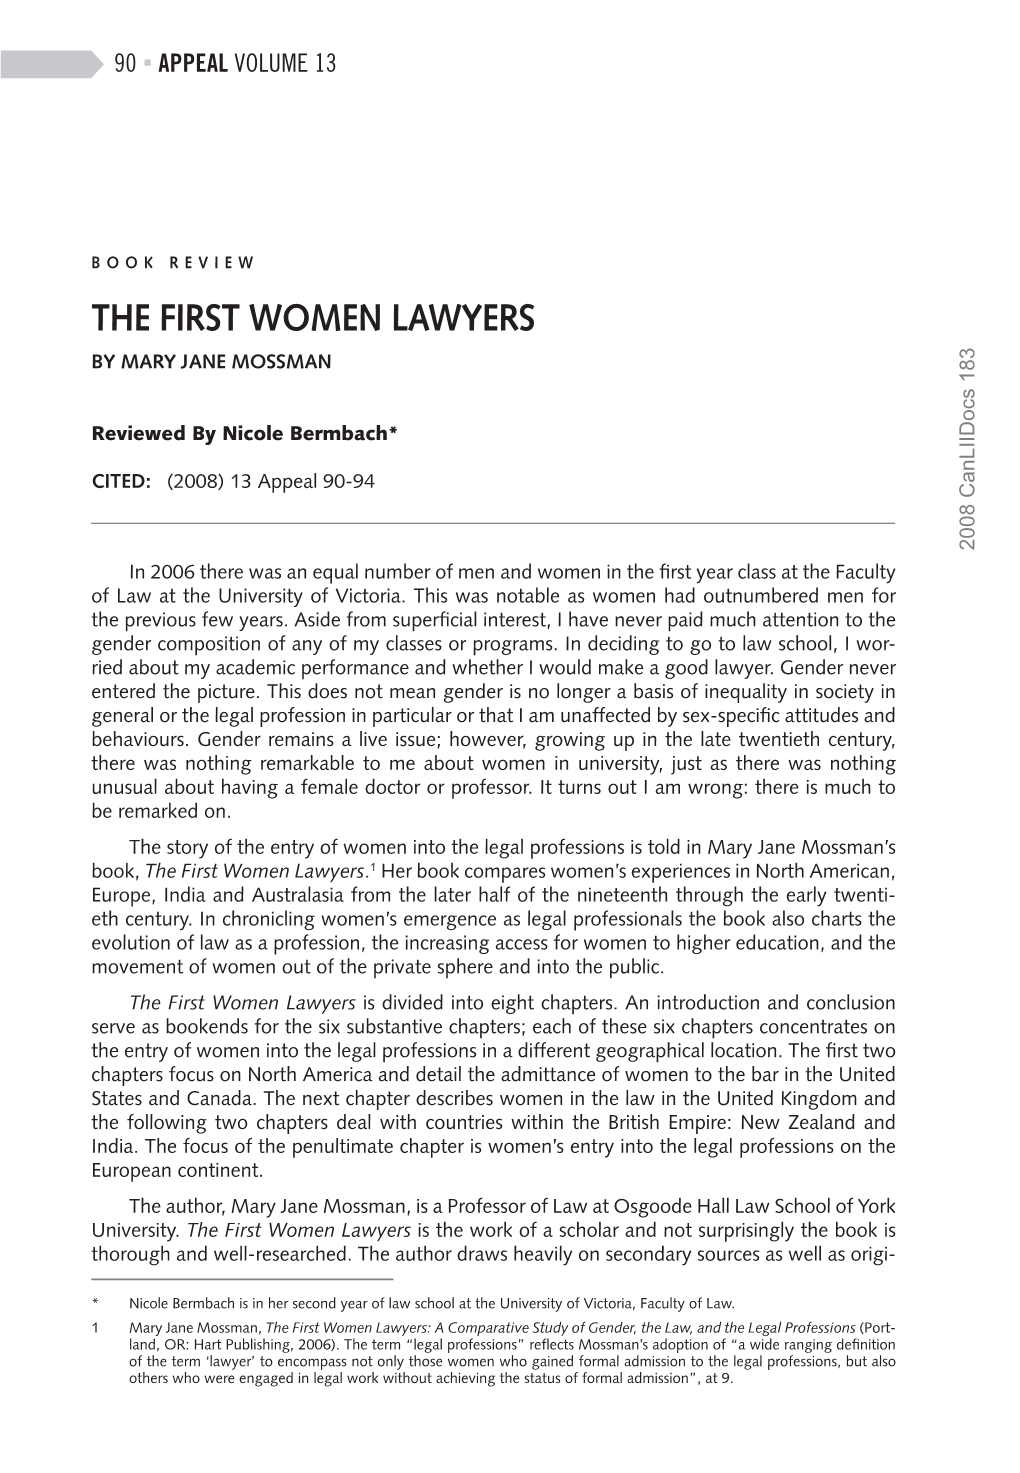 The First Women Lawyers by Mary Jane Mossman